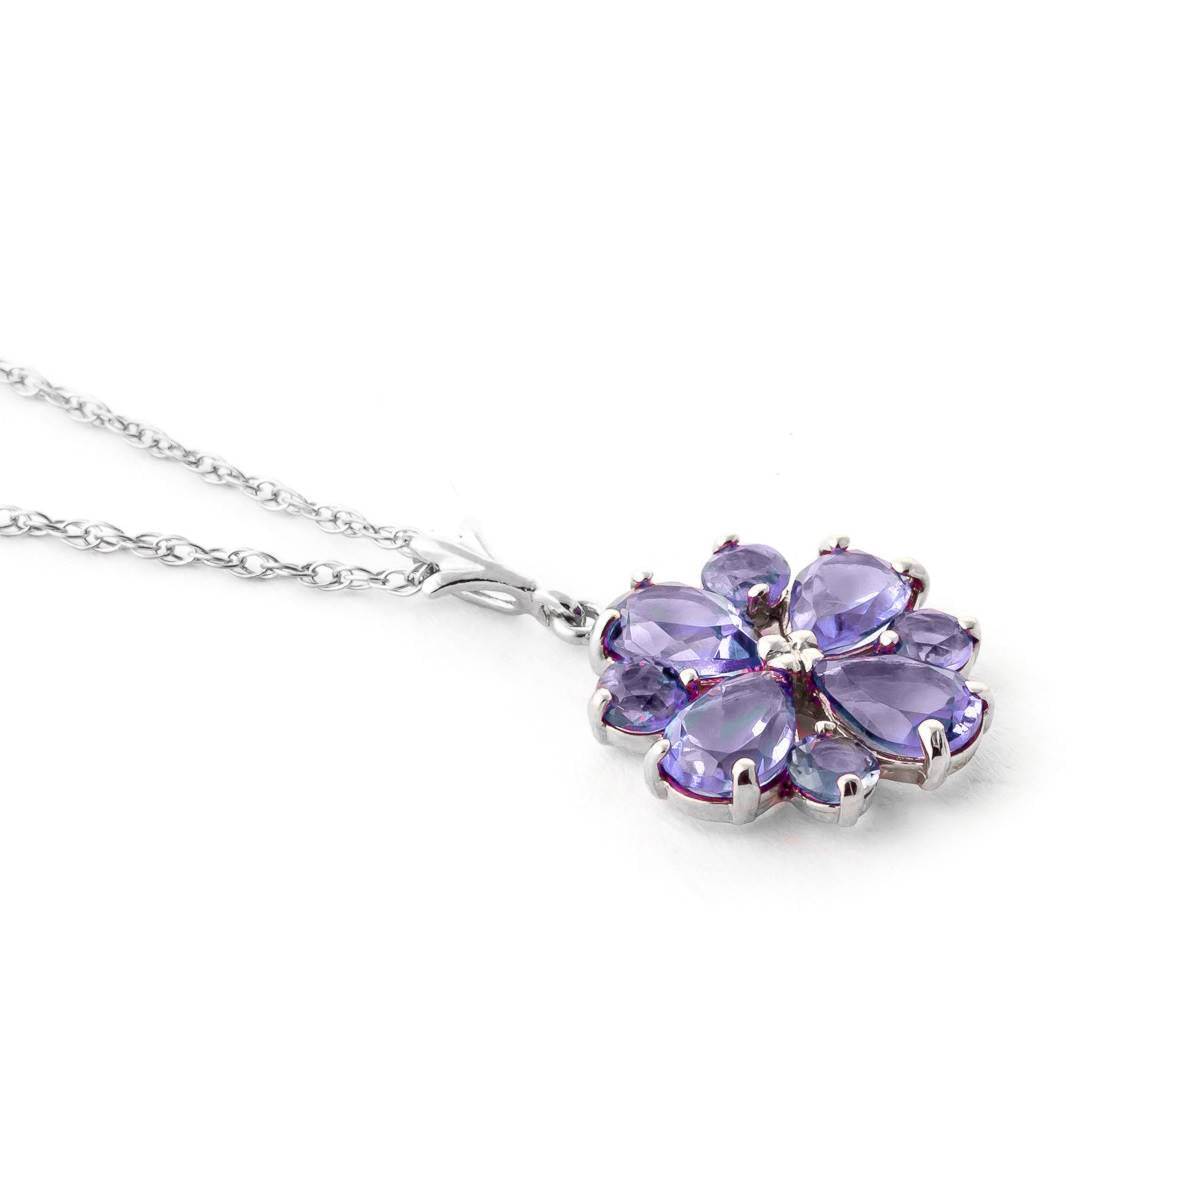 2.43 Carat 14K Solid White Gold Tanzanite Necklace Pressed Against You